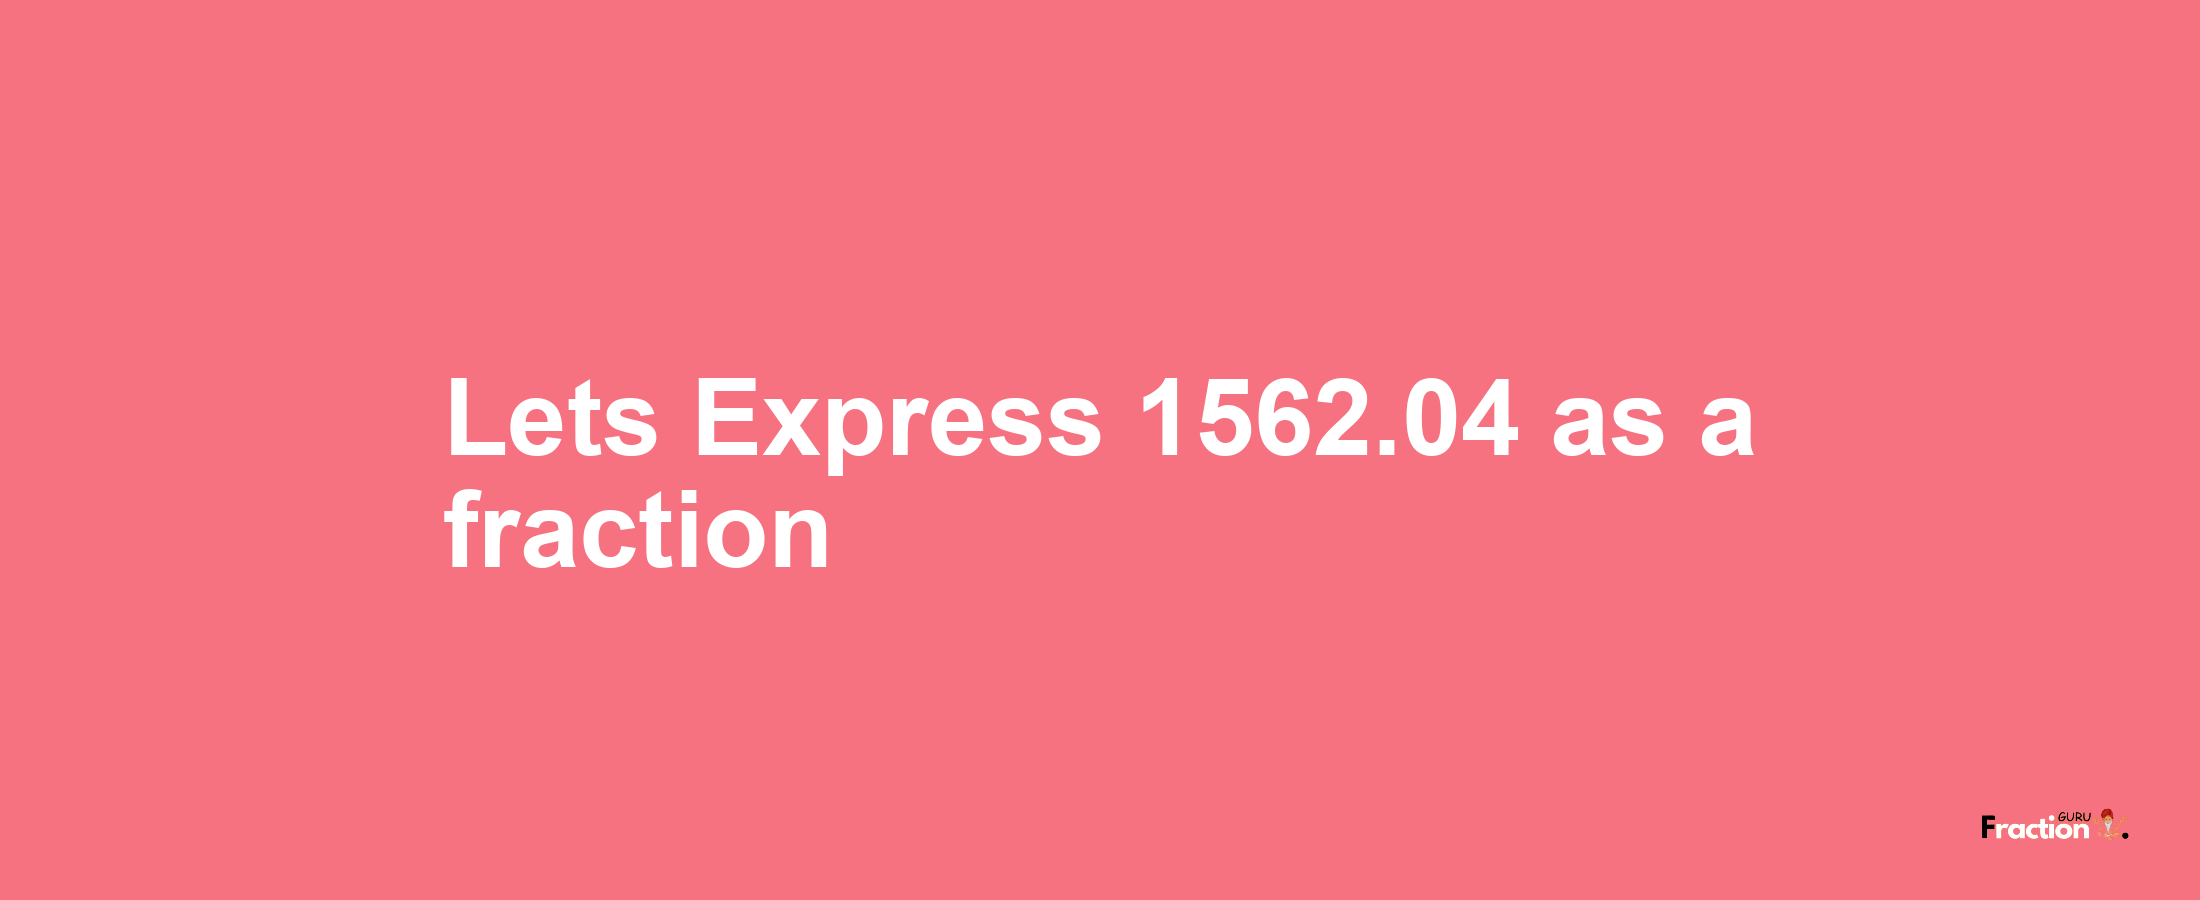 Lets Express 1562.04 as afraction